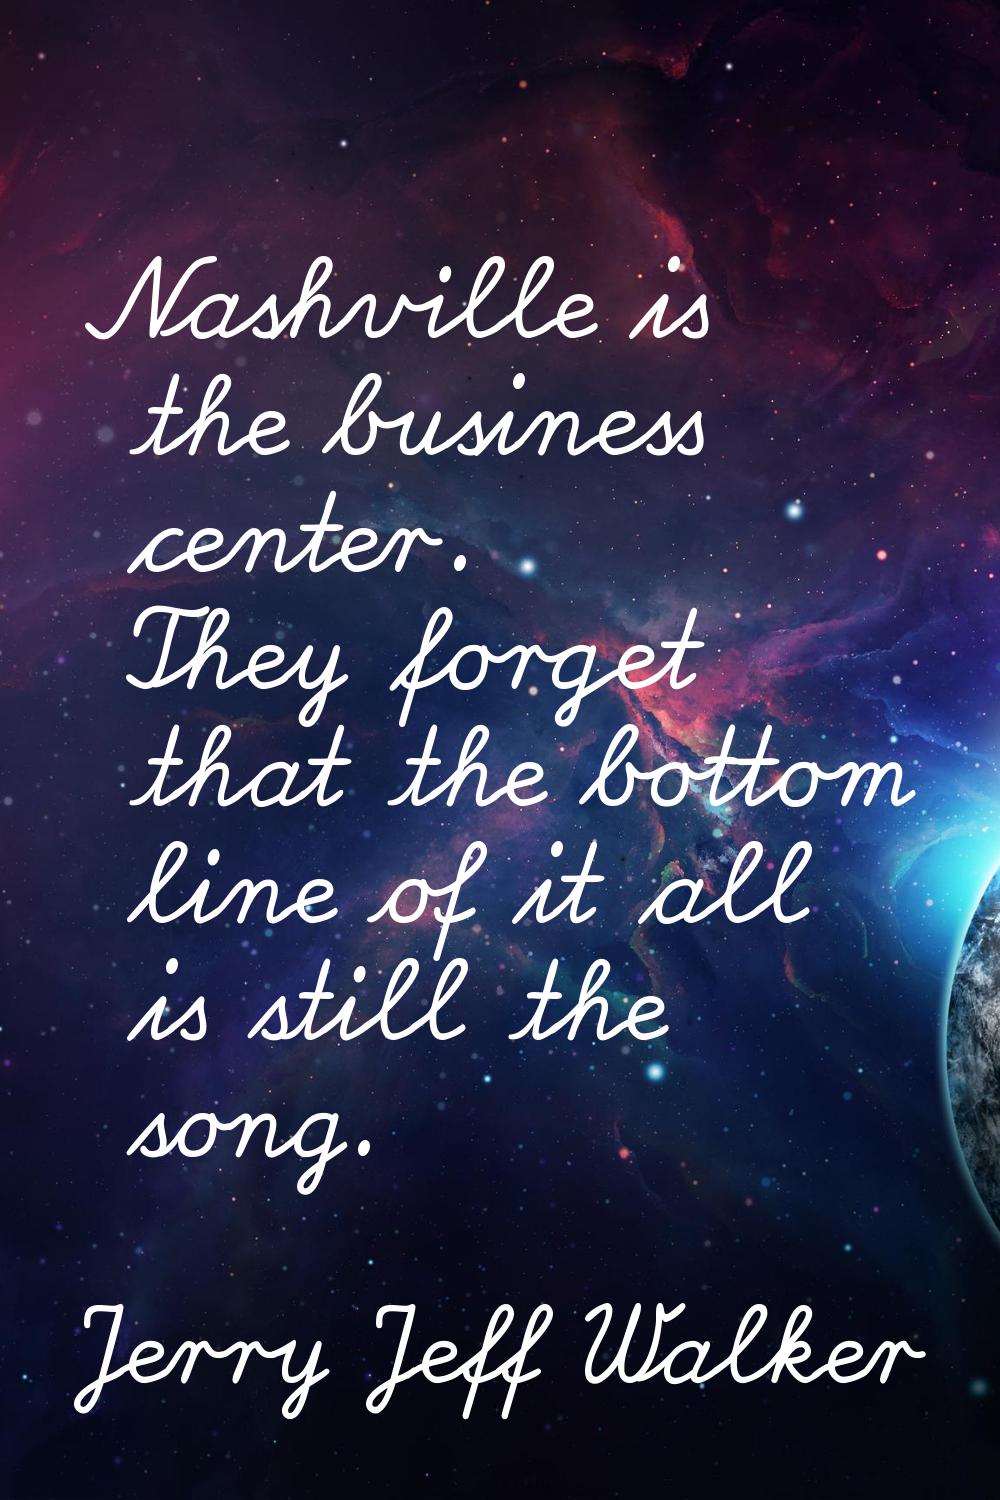 Nashville is the business center. They forget that the bottom line of it all is still the song.